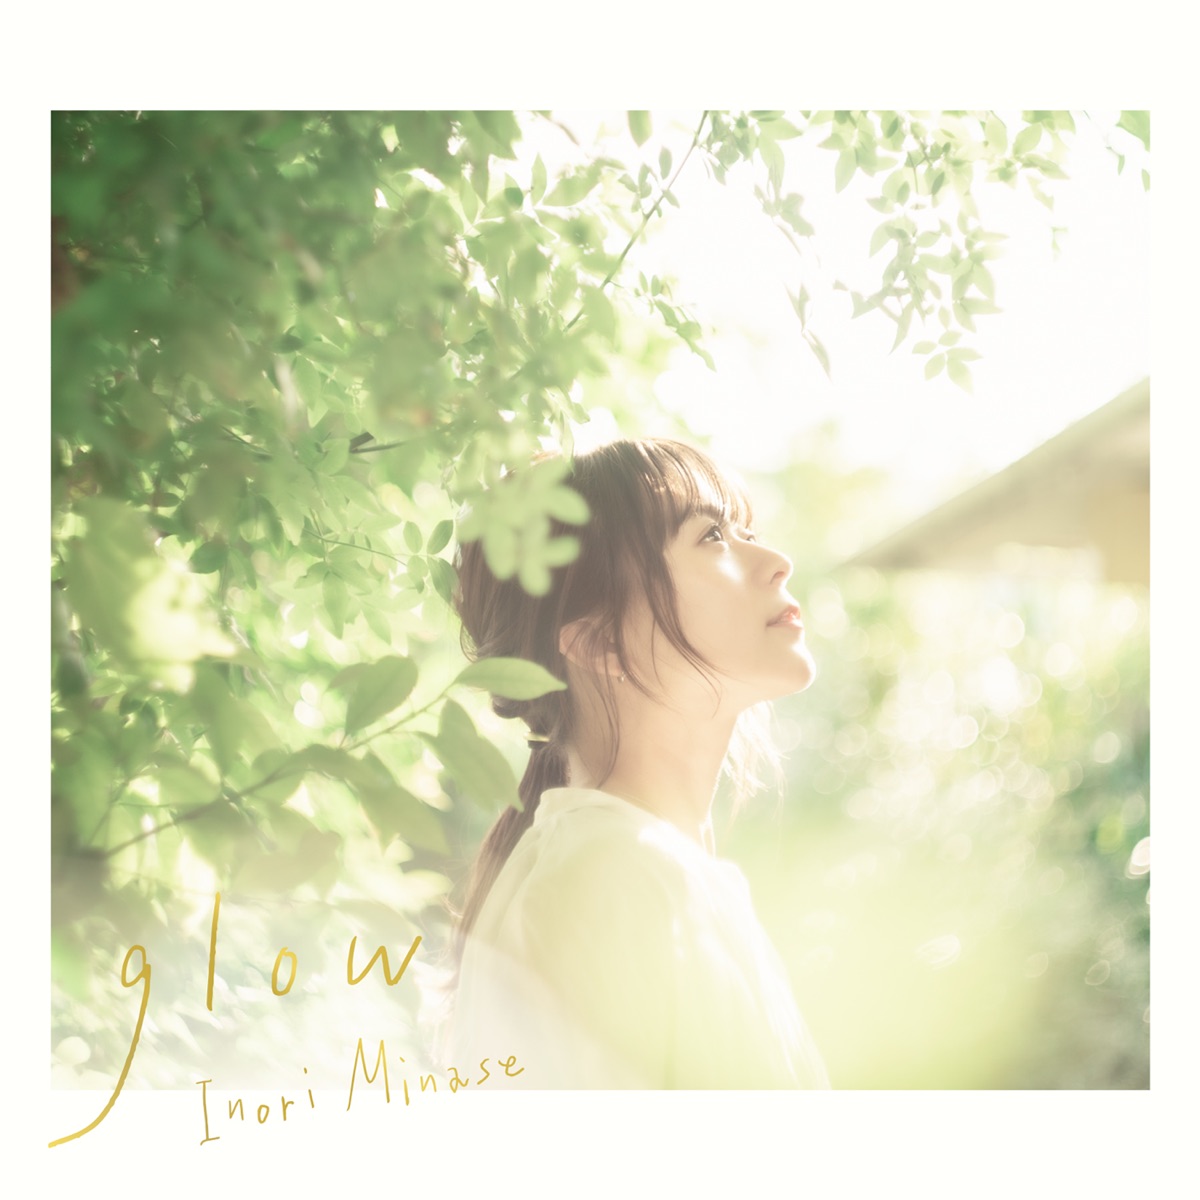 Cover art for『Inori Minase - August Memories』from the release『glow』